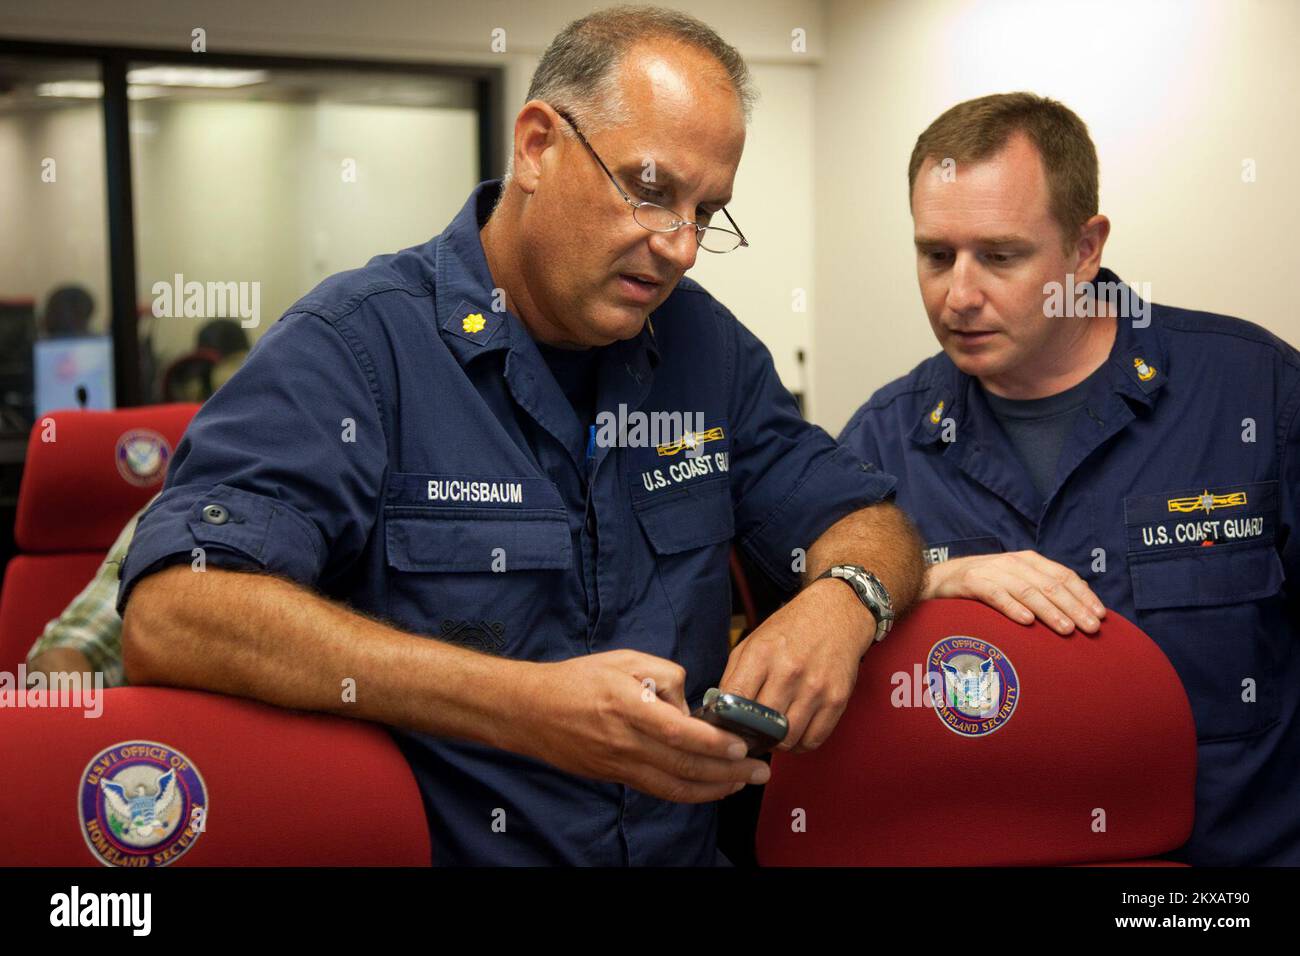 Flooding   Hurricane/Tropical Storm   Severe Storm - St. Thomas, US Virgin Islands, August 30, 2010   Coast Guard Marine Safety Supervisor, LCDR Daniel Buchsbaum looks at an updated situation report on Hurricane Earl on his blackberry with Coast Guard Marine Science Technician Chief James Carew at the Virgin Islands Territorial Emergency Management Agency (VITEMA) Emergency Operations Center in St. Thomas. Andrea Booher/FEMA.. Photographs Relating to Disasters and Emergency Management Programs, Activities, and Officials Stock Photo